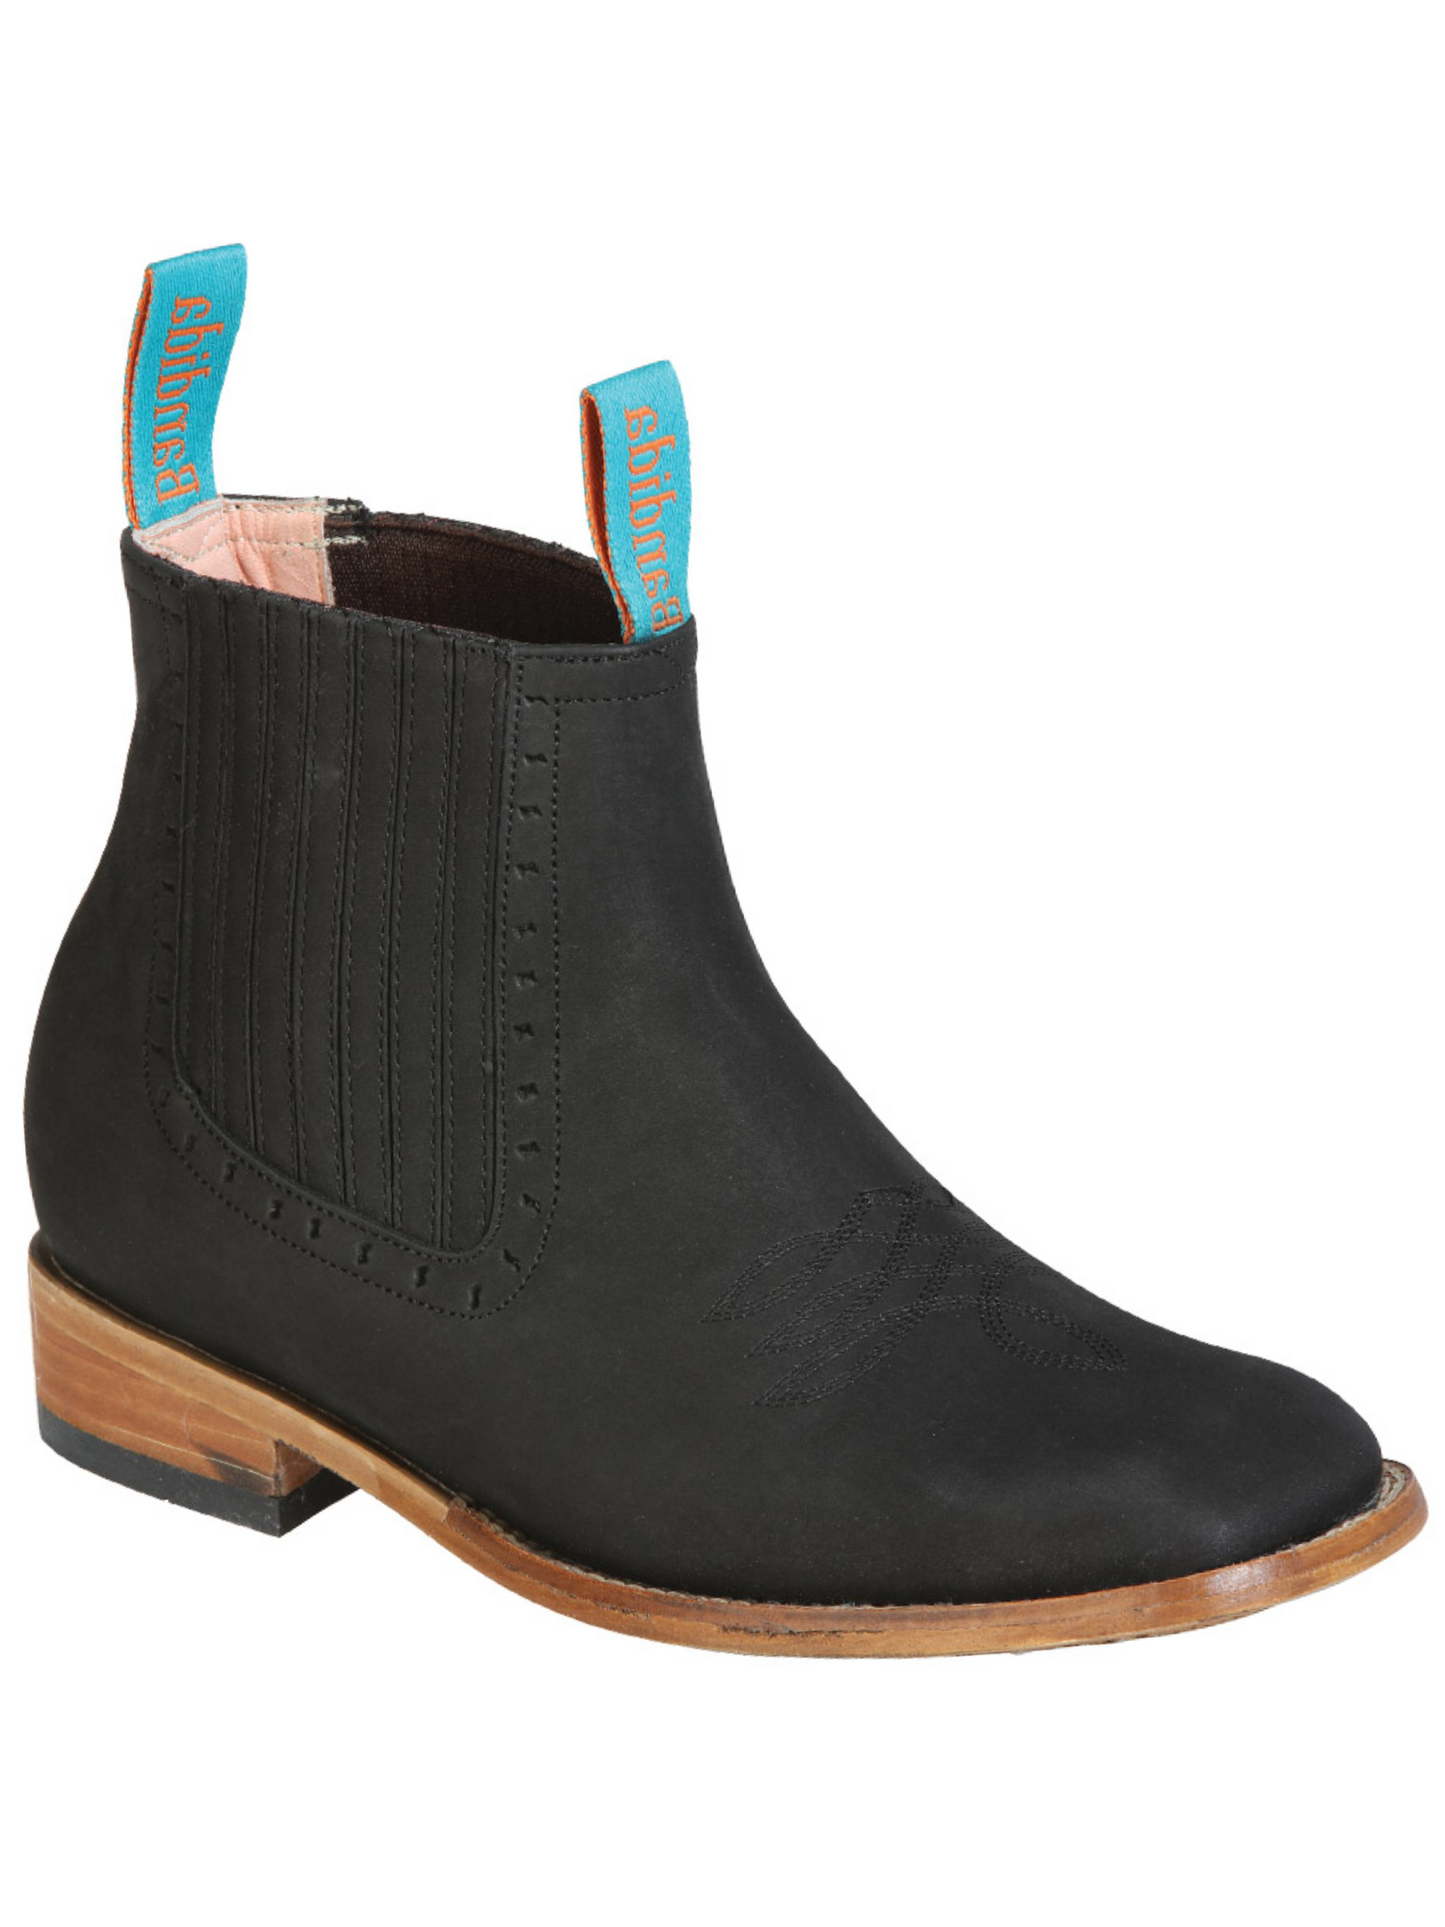 Classic Nubuck Leather Rodeo Cowboy Ankle Boots for Women 'La Barca' - ID: 126663 Western Ankle Boots La Barca